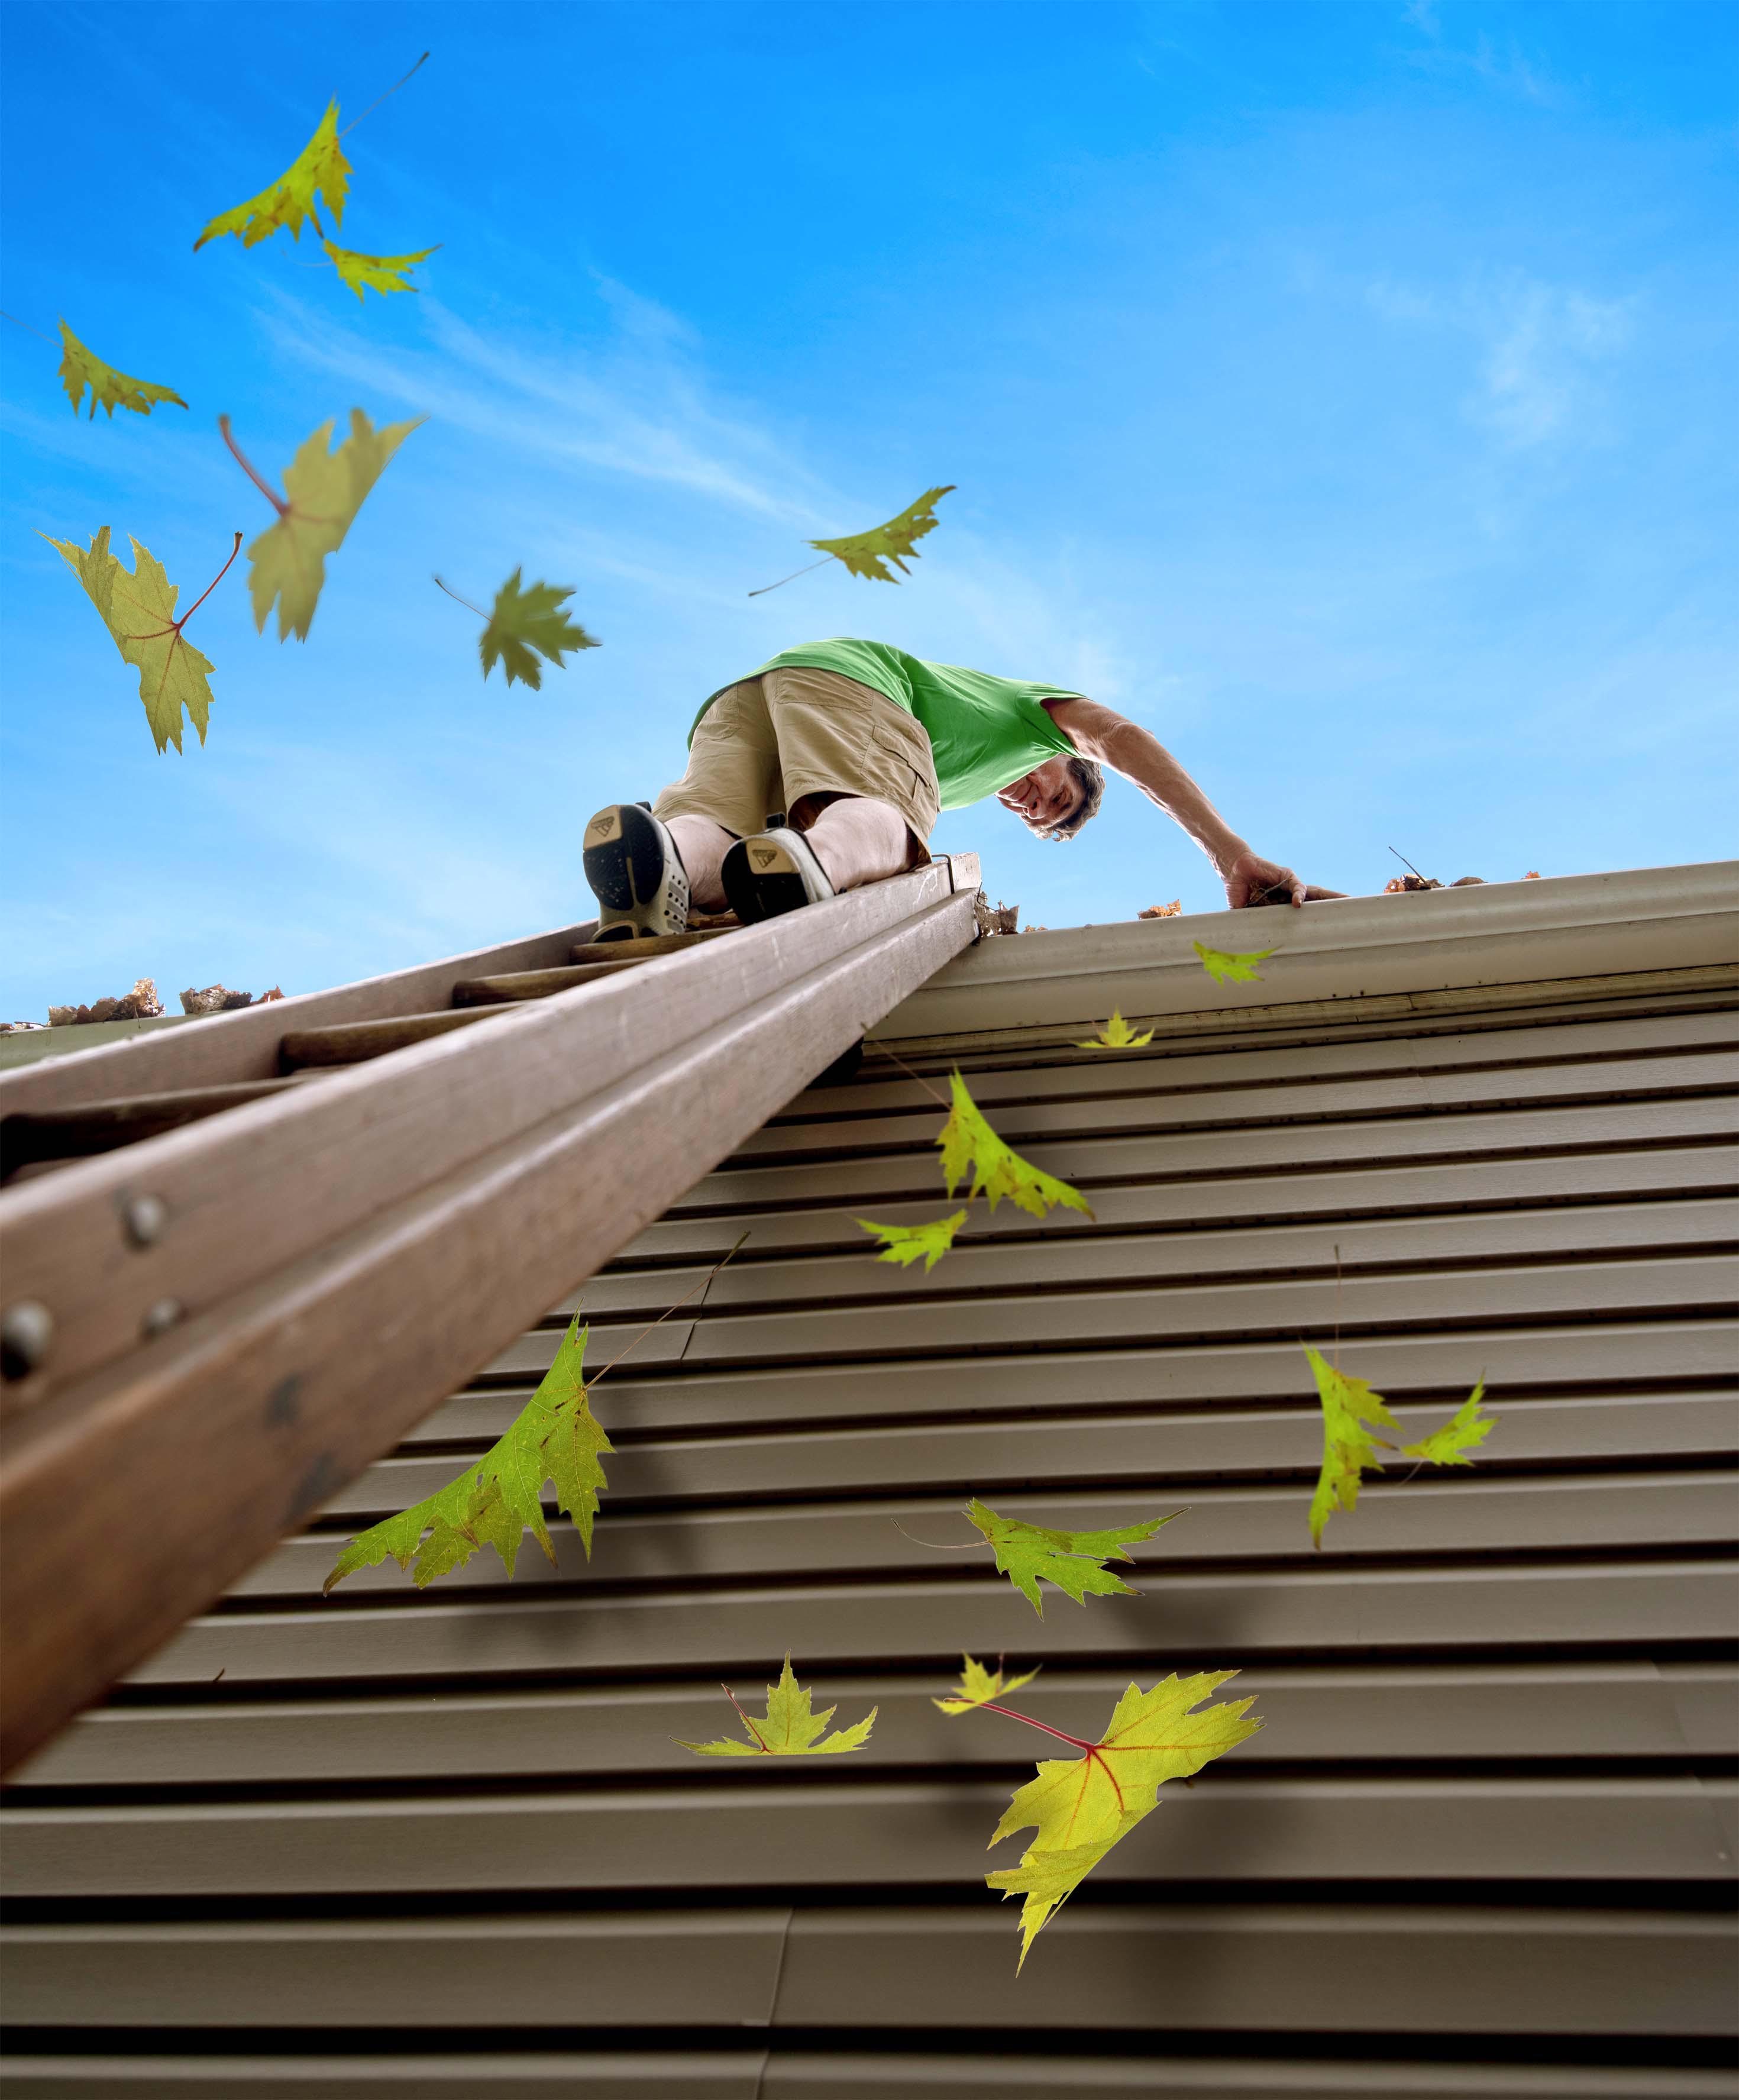 LeafFilter Gutter Protection Peoria (800)290-6106